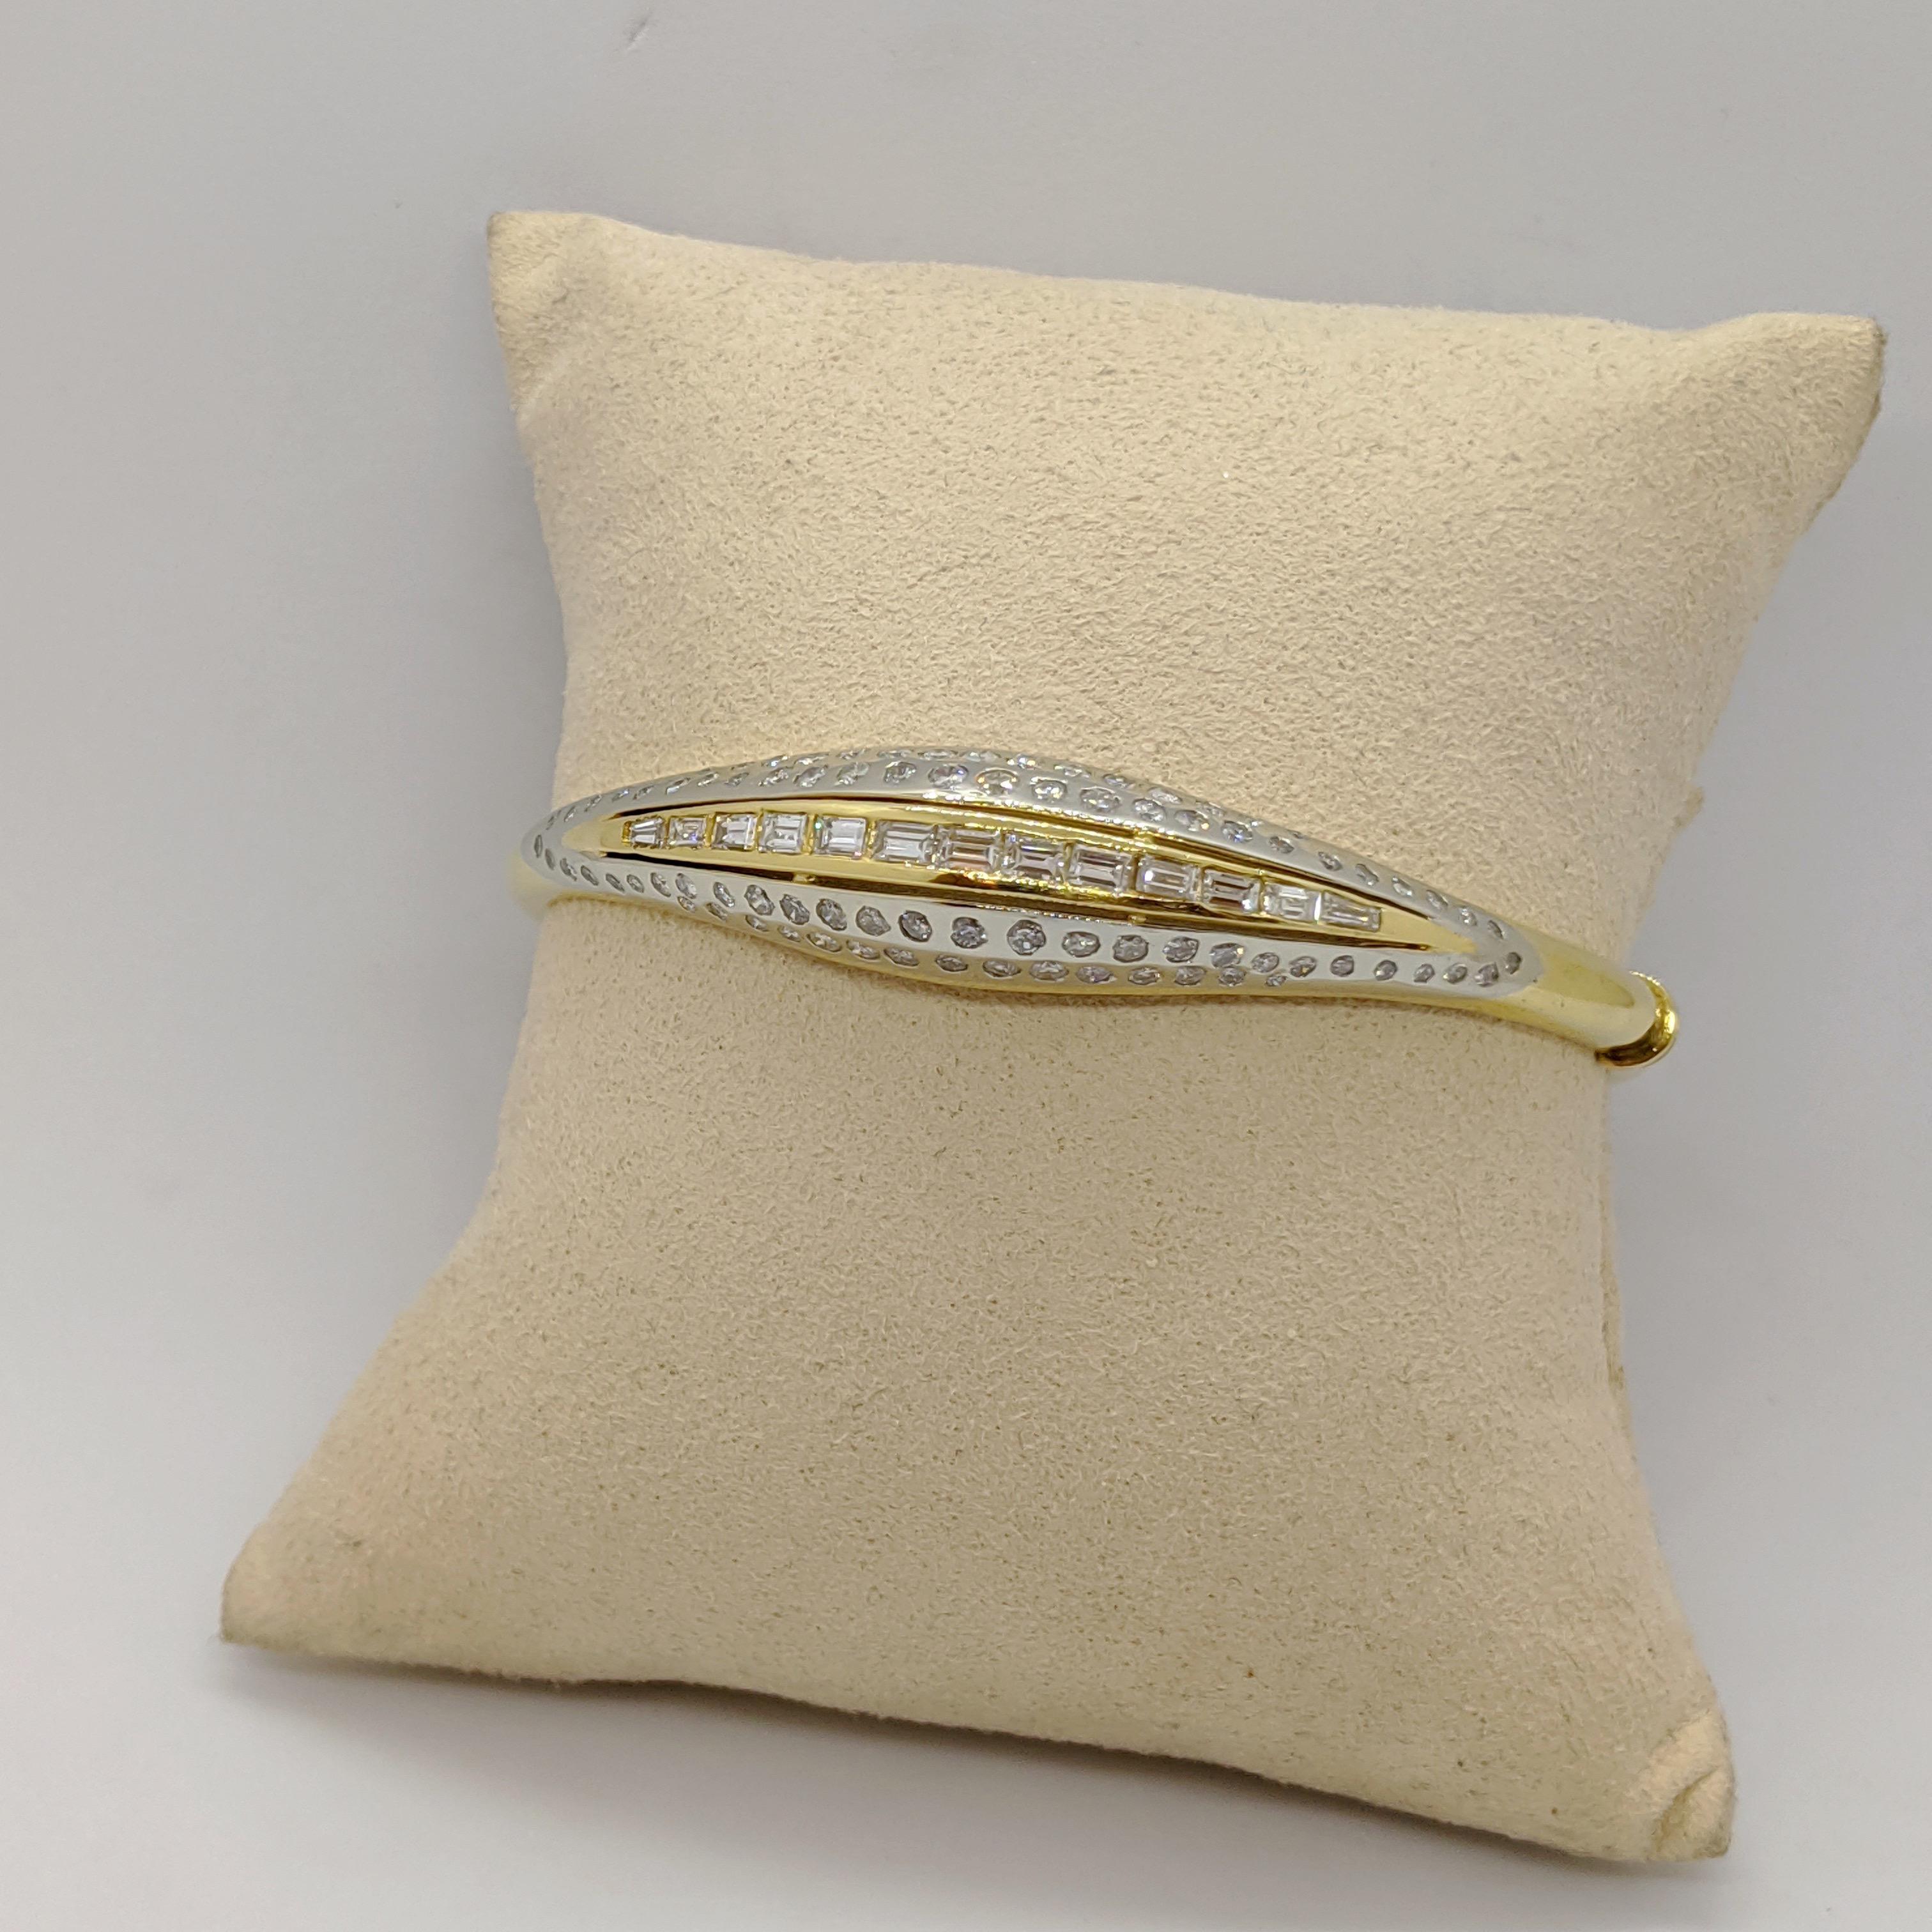 18 KT YG/WG Bangle Bracelet with 3.40 Carat Round and Baguette Diamonds For Sale 2